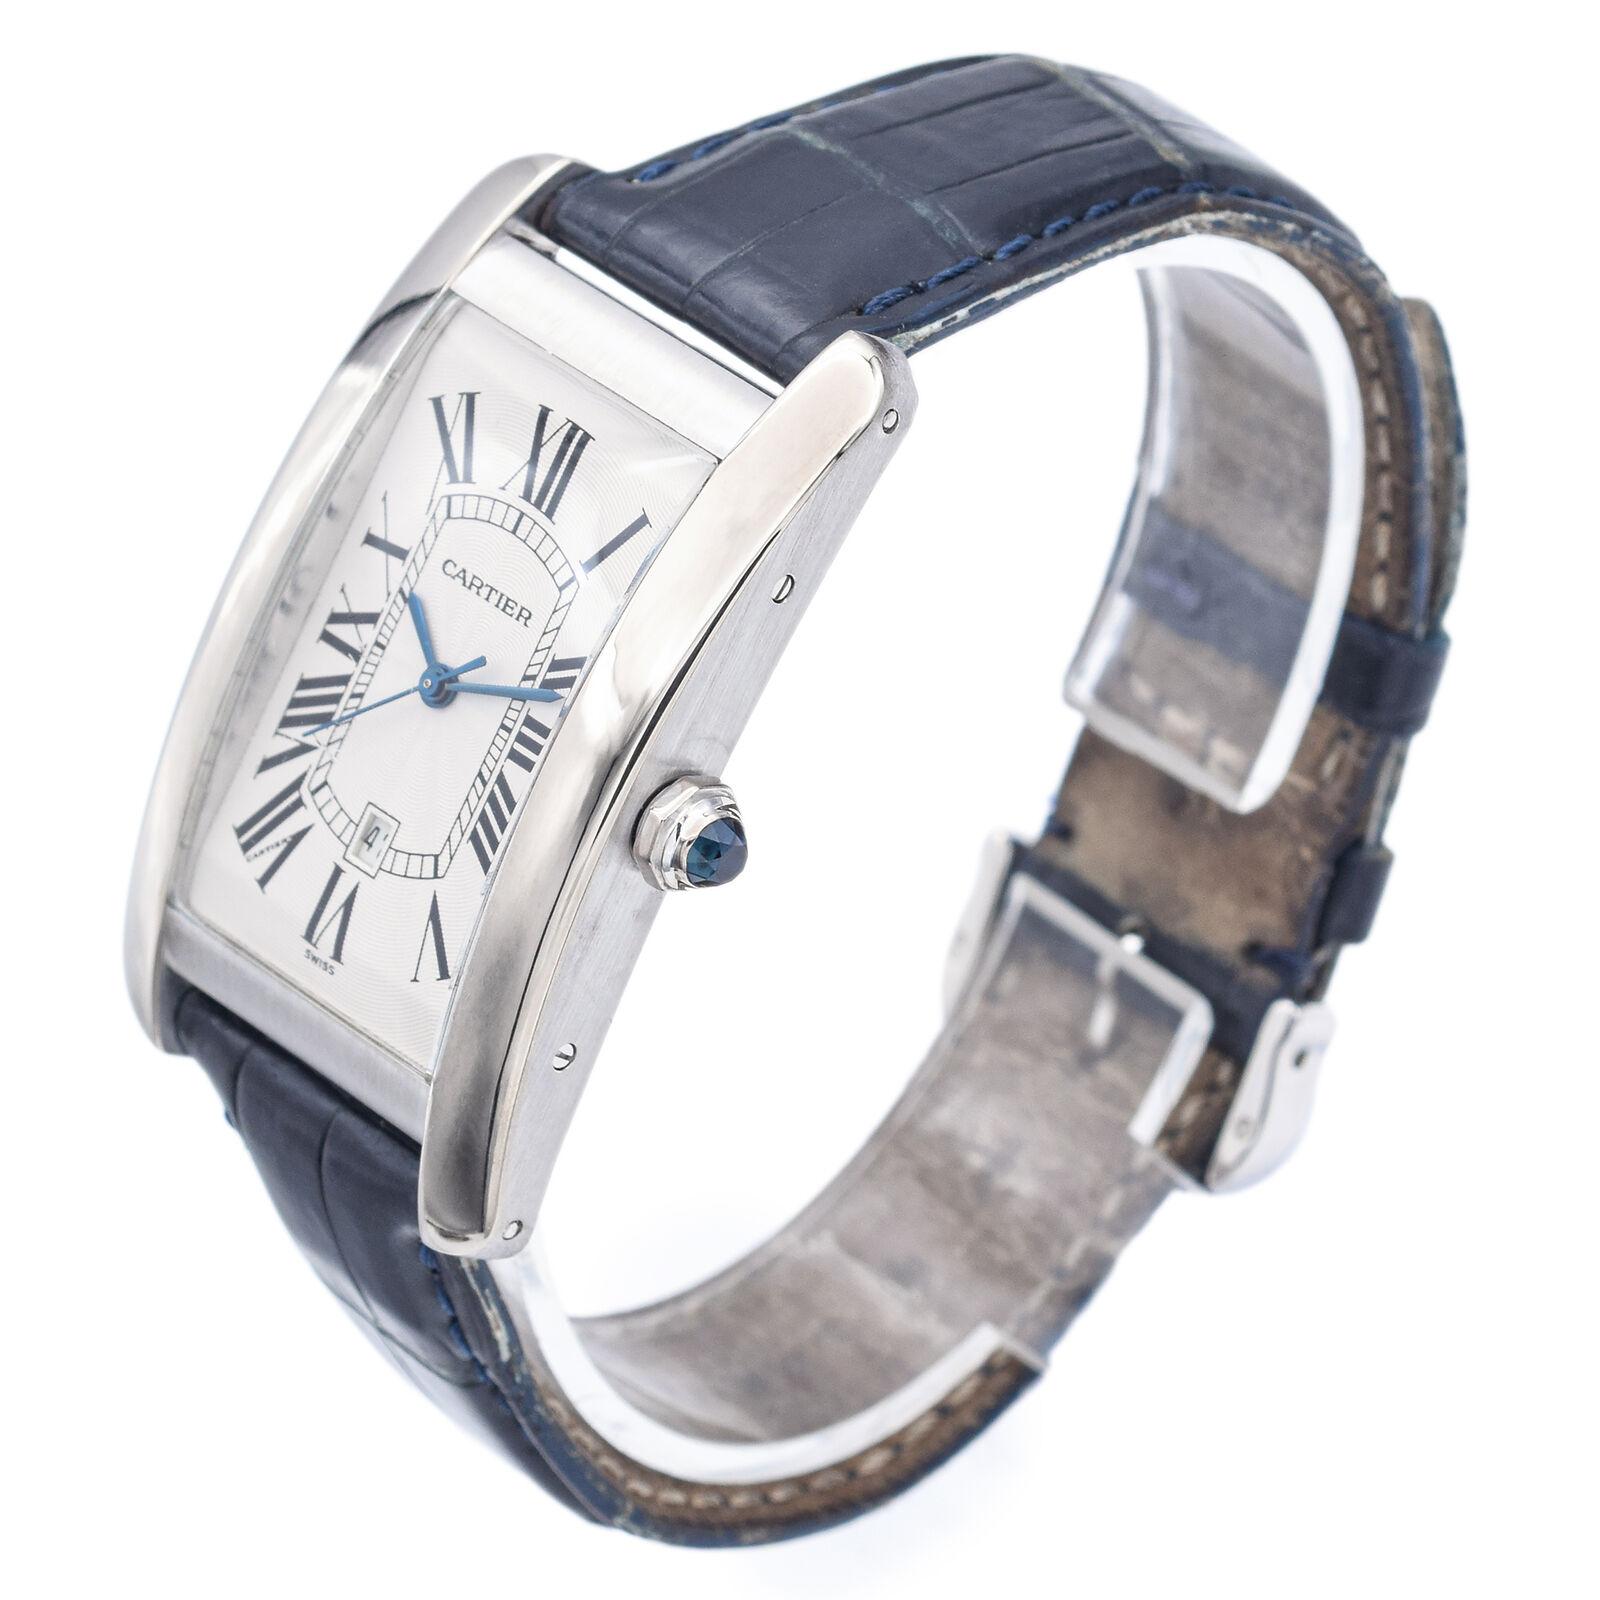 keeping accurate time

Weight: 65.8 Grams
Case Size: 45.0 x 26.5 mm
Reference #: 1741
Band Length: 8.75 Inches
Hallmark: Cartier, 18K

Item #: BR-1033-081723-19